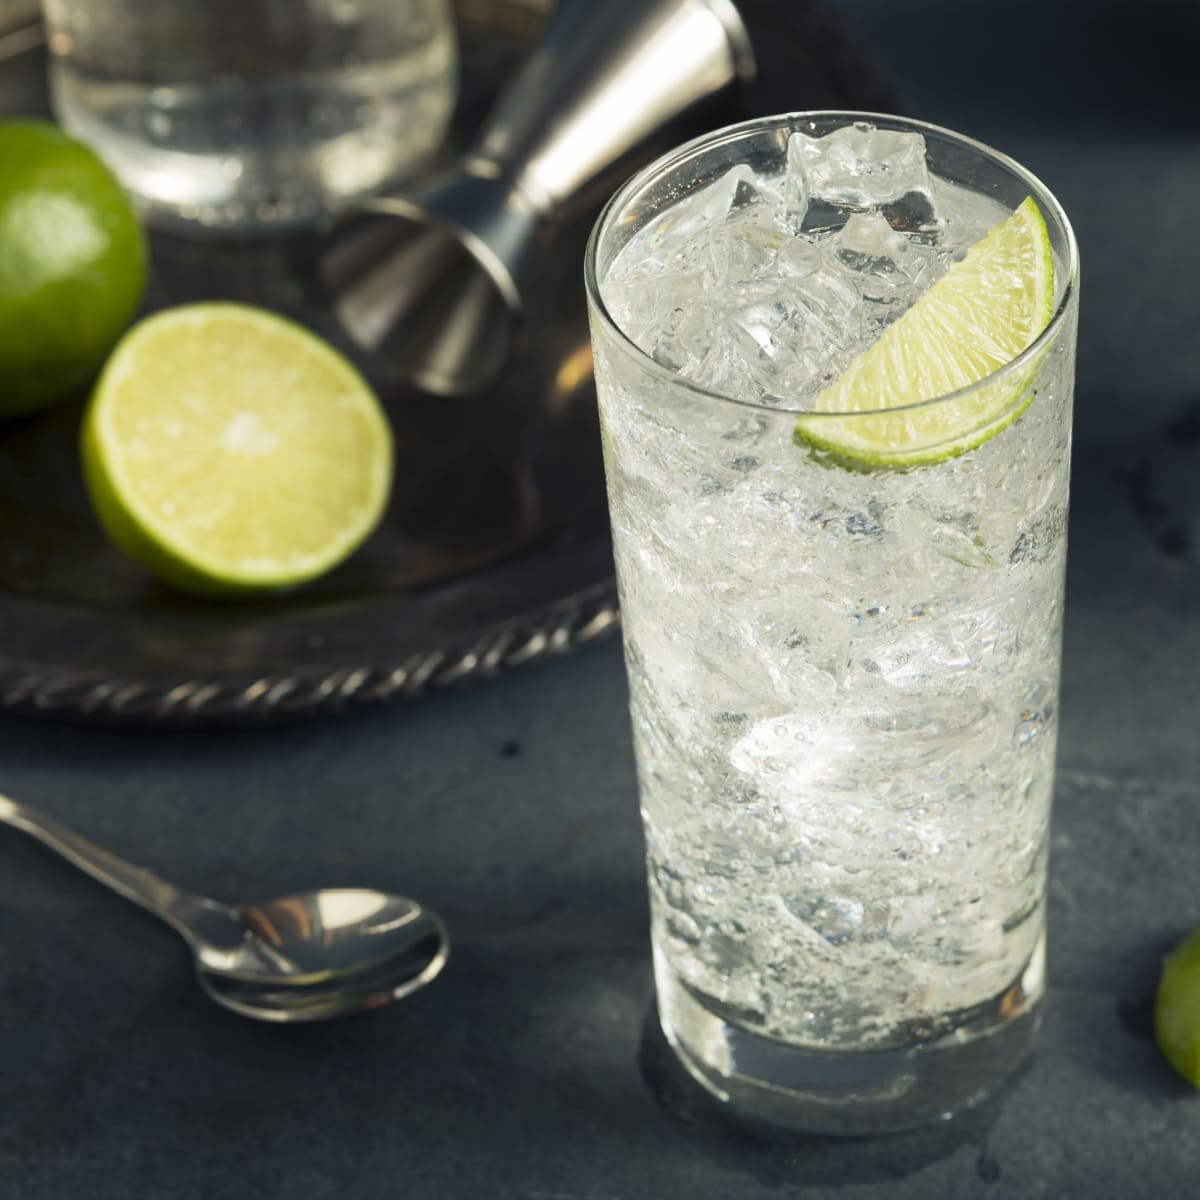  A tall glass of vodka soda filled with ice garnished with lime slice, bottle of vodka, jigger and lemon slice on a steel tray in the background. 